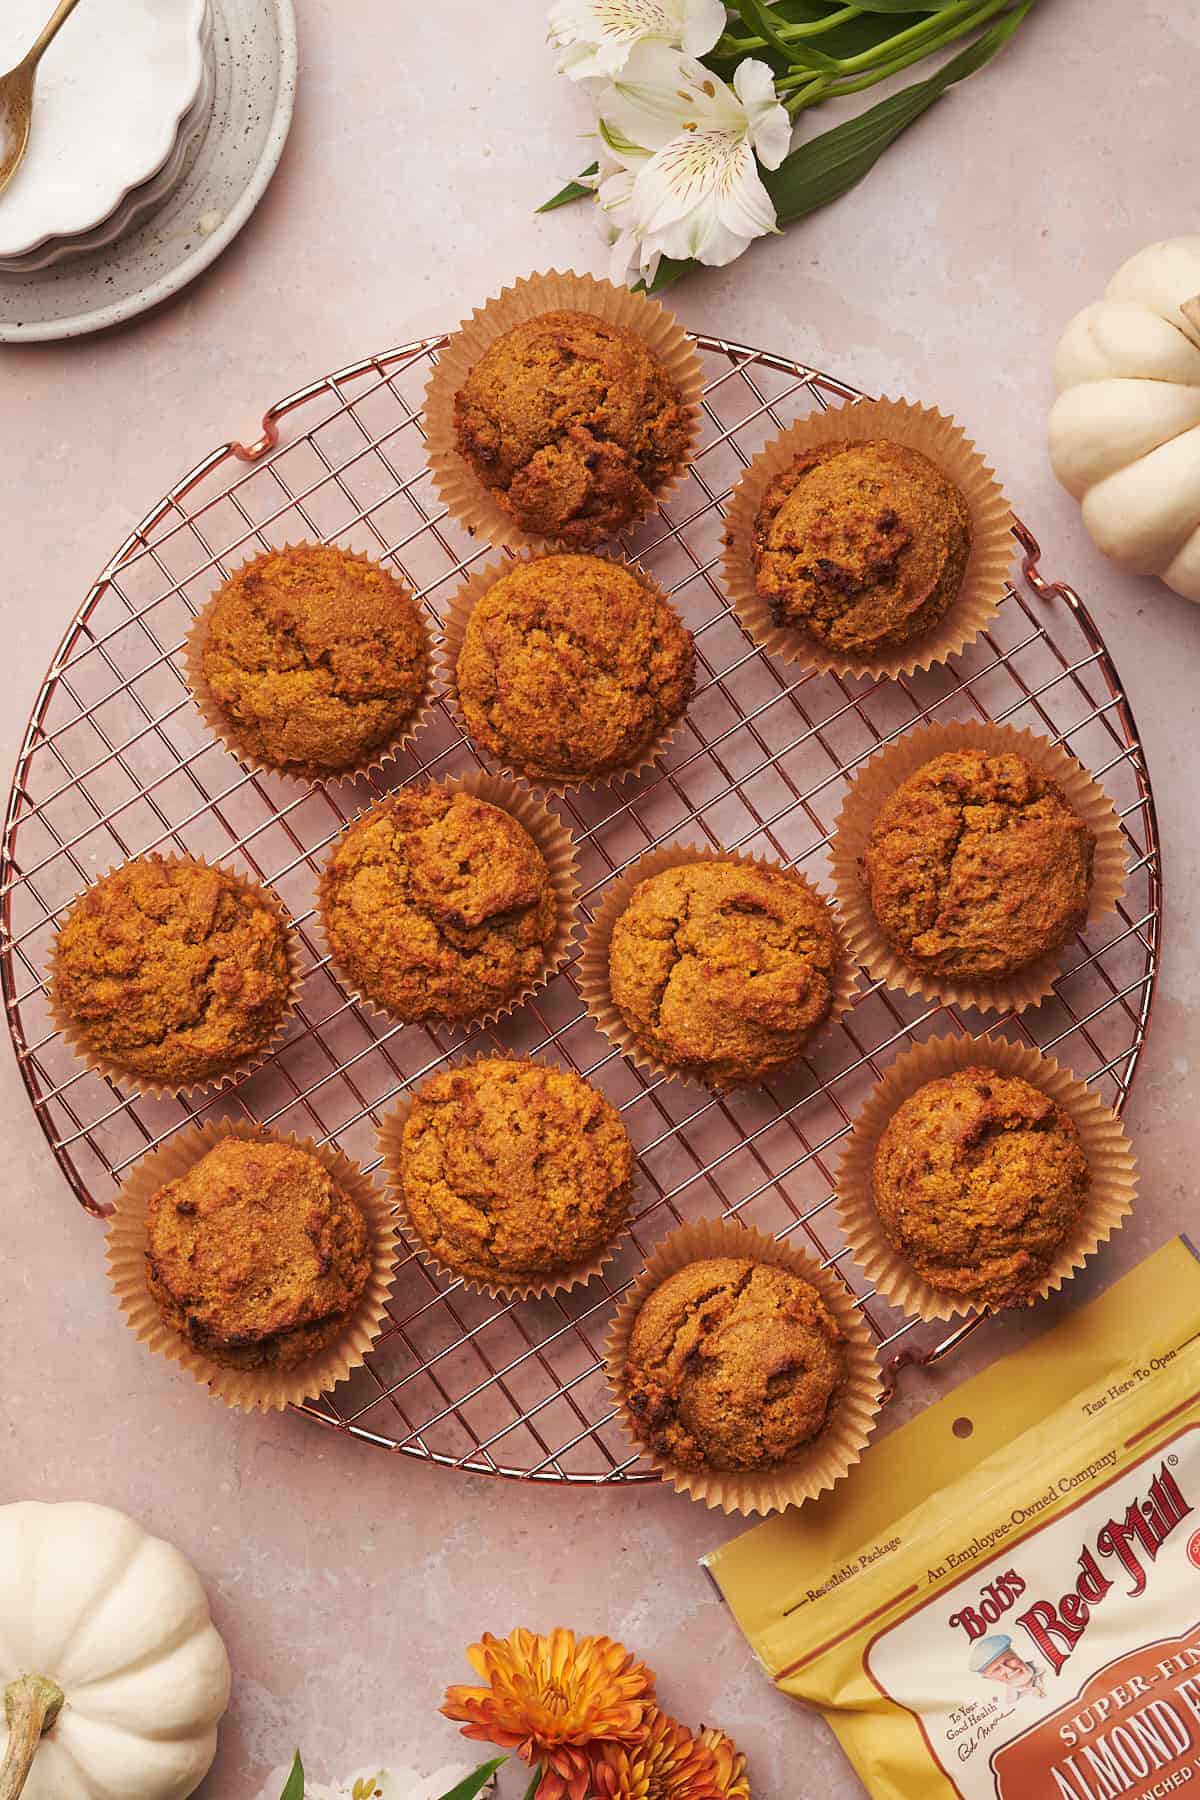 pumpkin muffins cooling on a round rose gold cooling rack, surrounded by a bag of Bob's red mill almond flour, and a white pumpkin. 